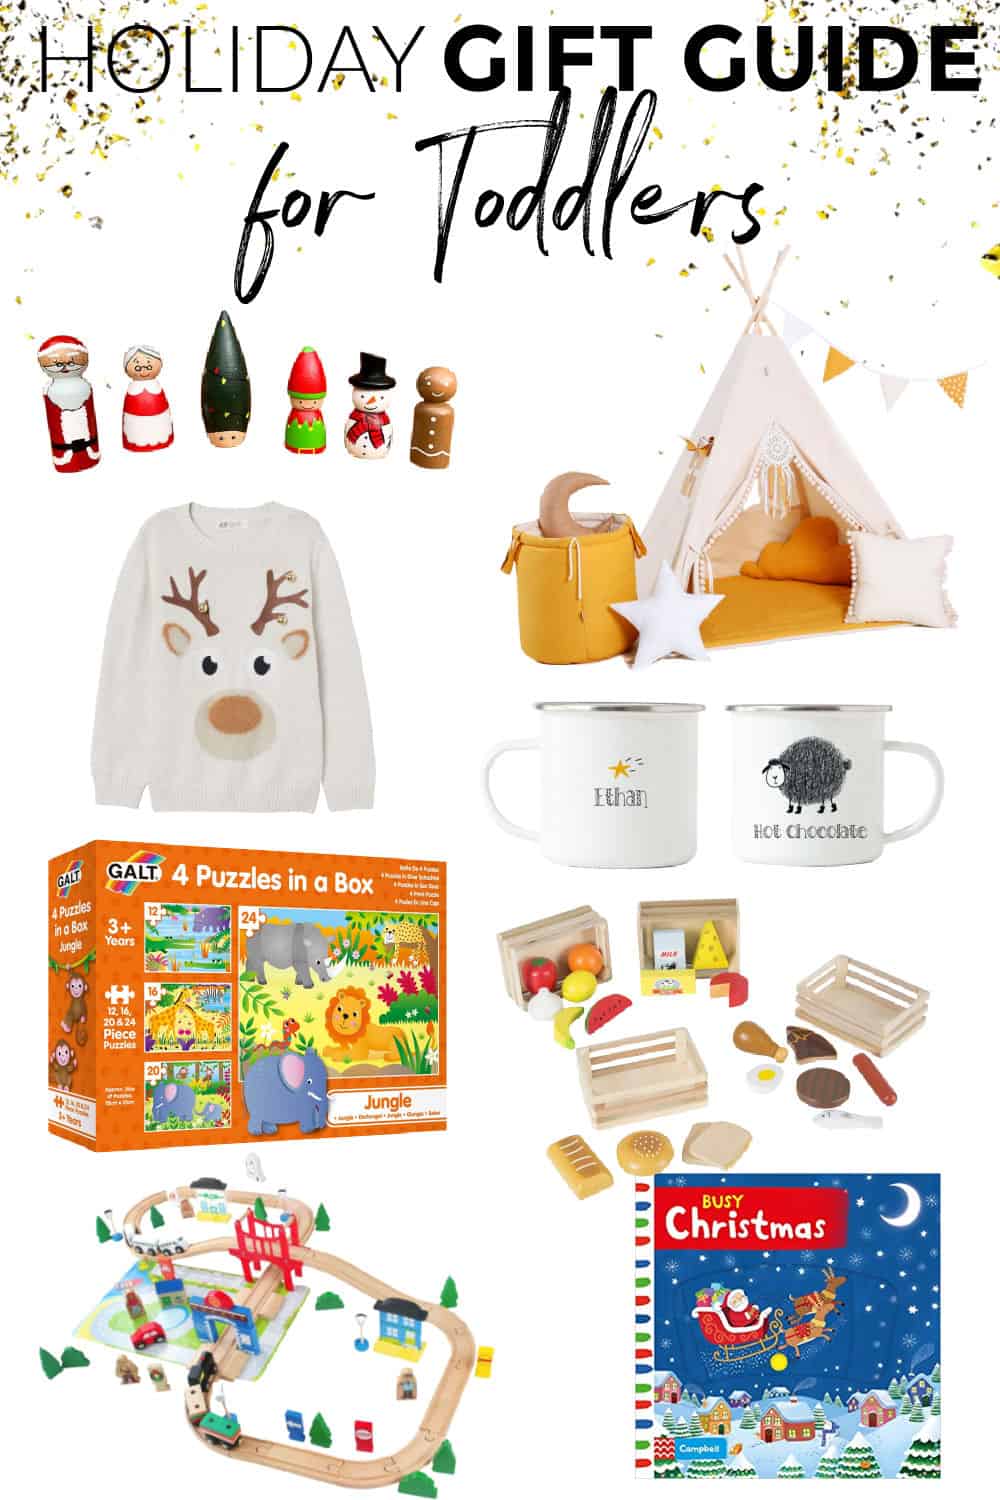 Holiday gift guide for toddlers Christmas 2020